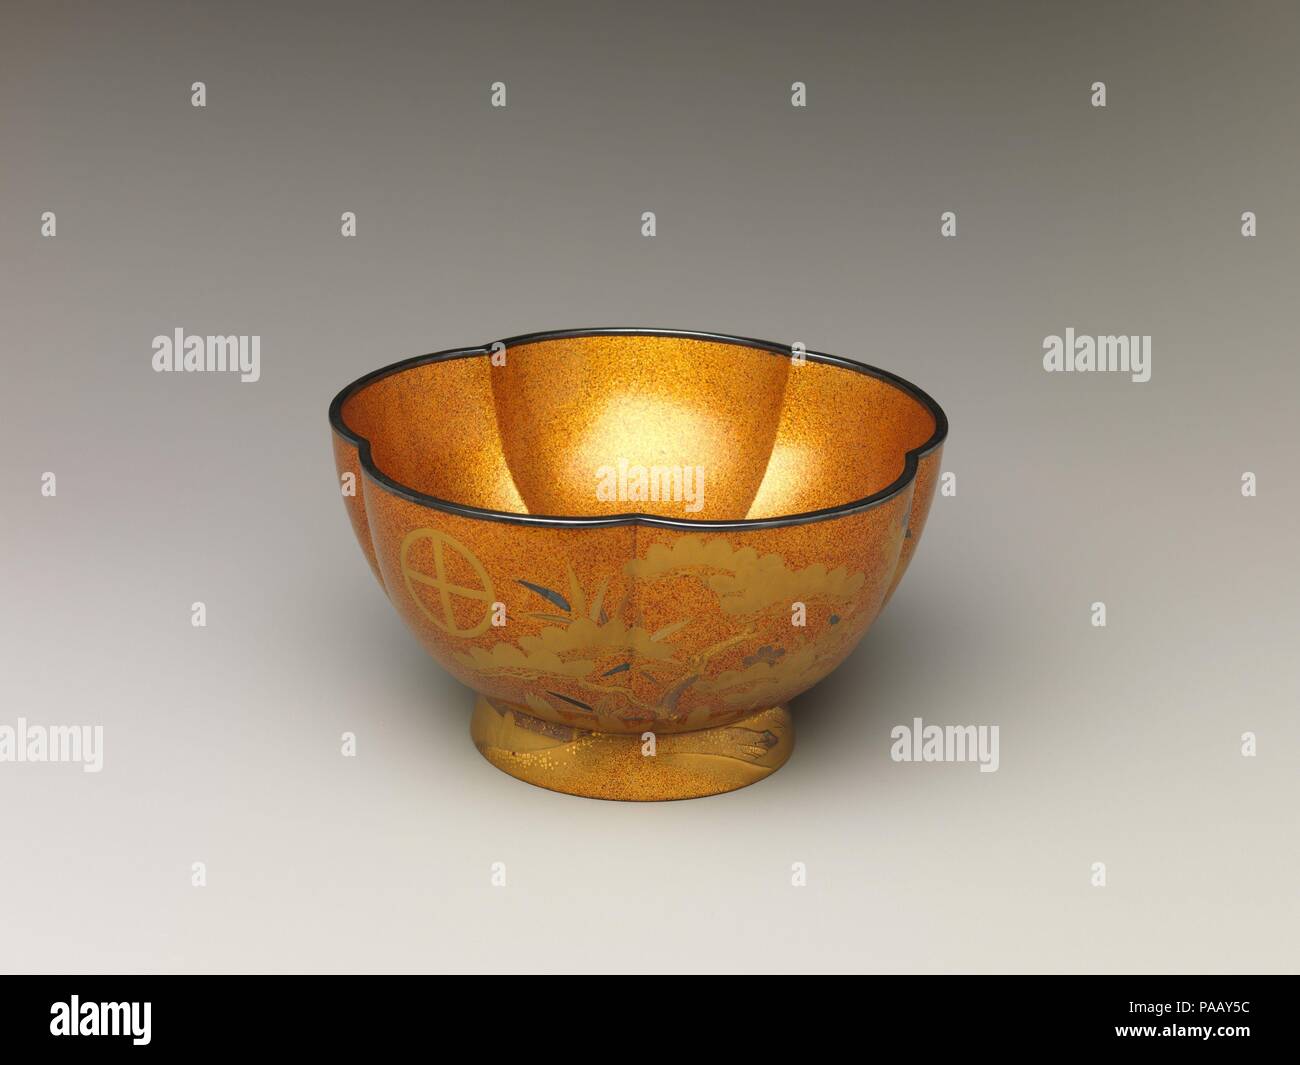 Bowl with with Design of Pine, Bamboo, and Cherry Blossom. Culture: Japan.  Dimensions: H. 3 3/8 in. (8.6 cm); W. 6 1/4 in. (15.9 cm). Date: 19th  century. This bowl, part of